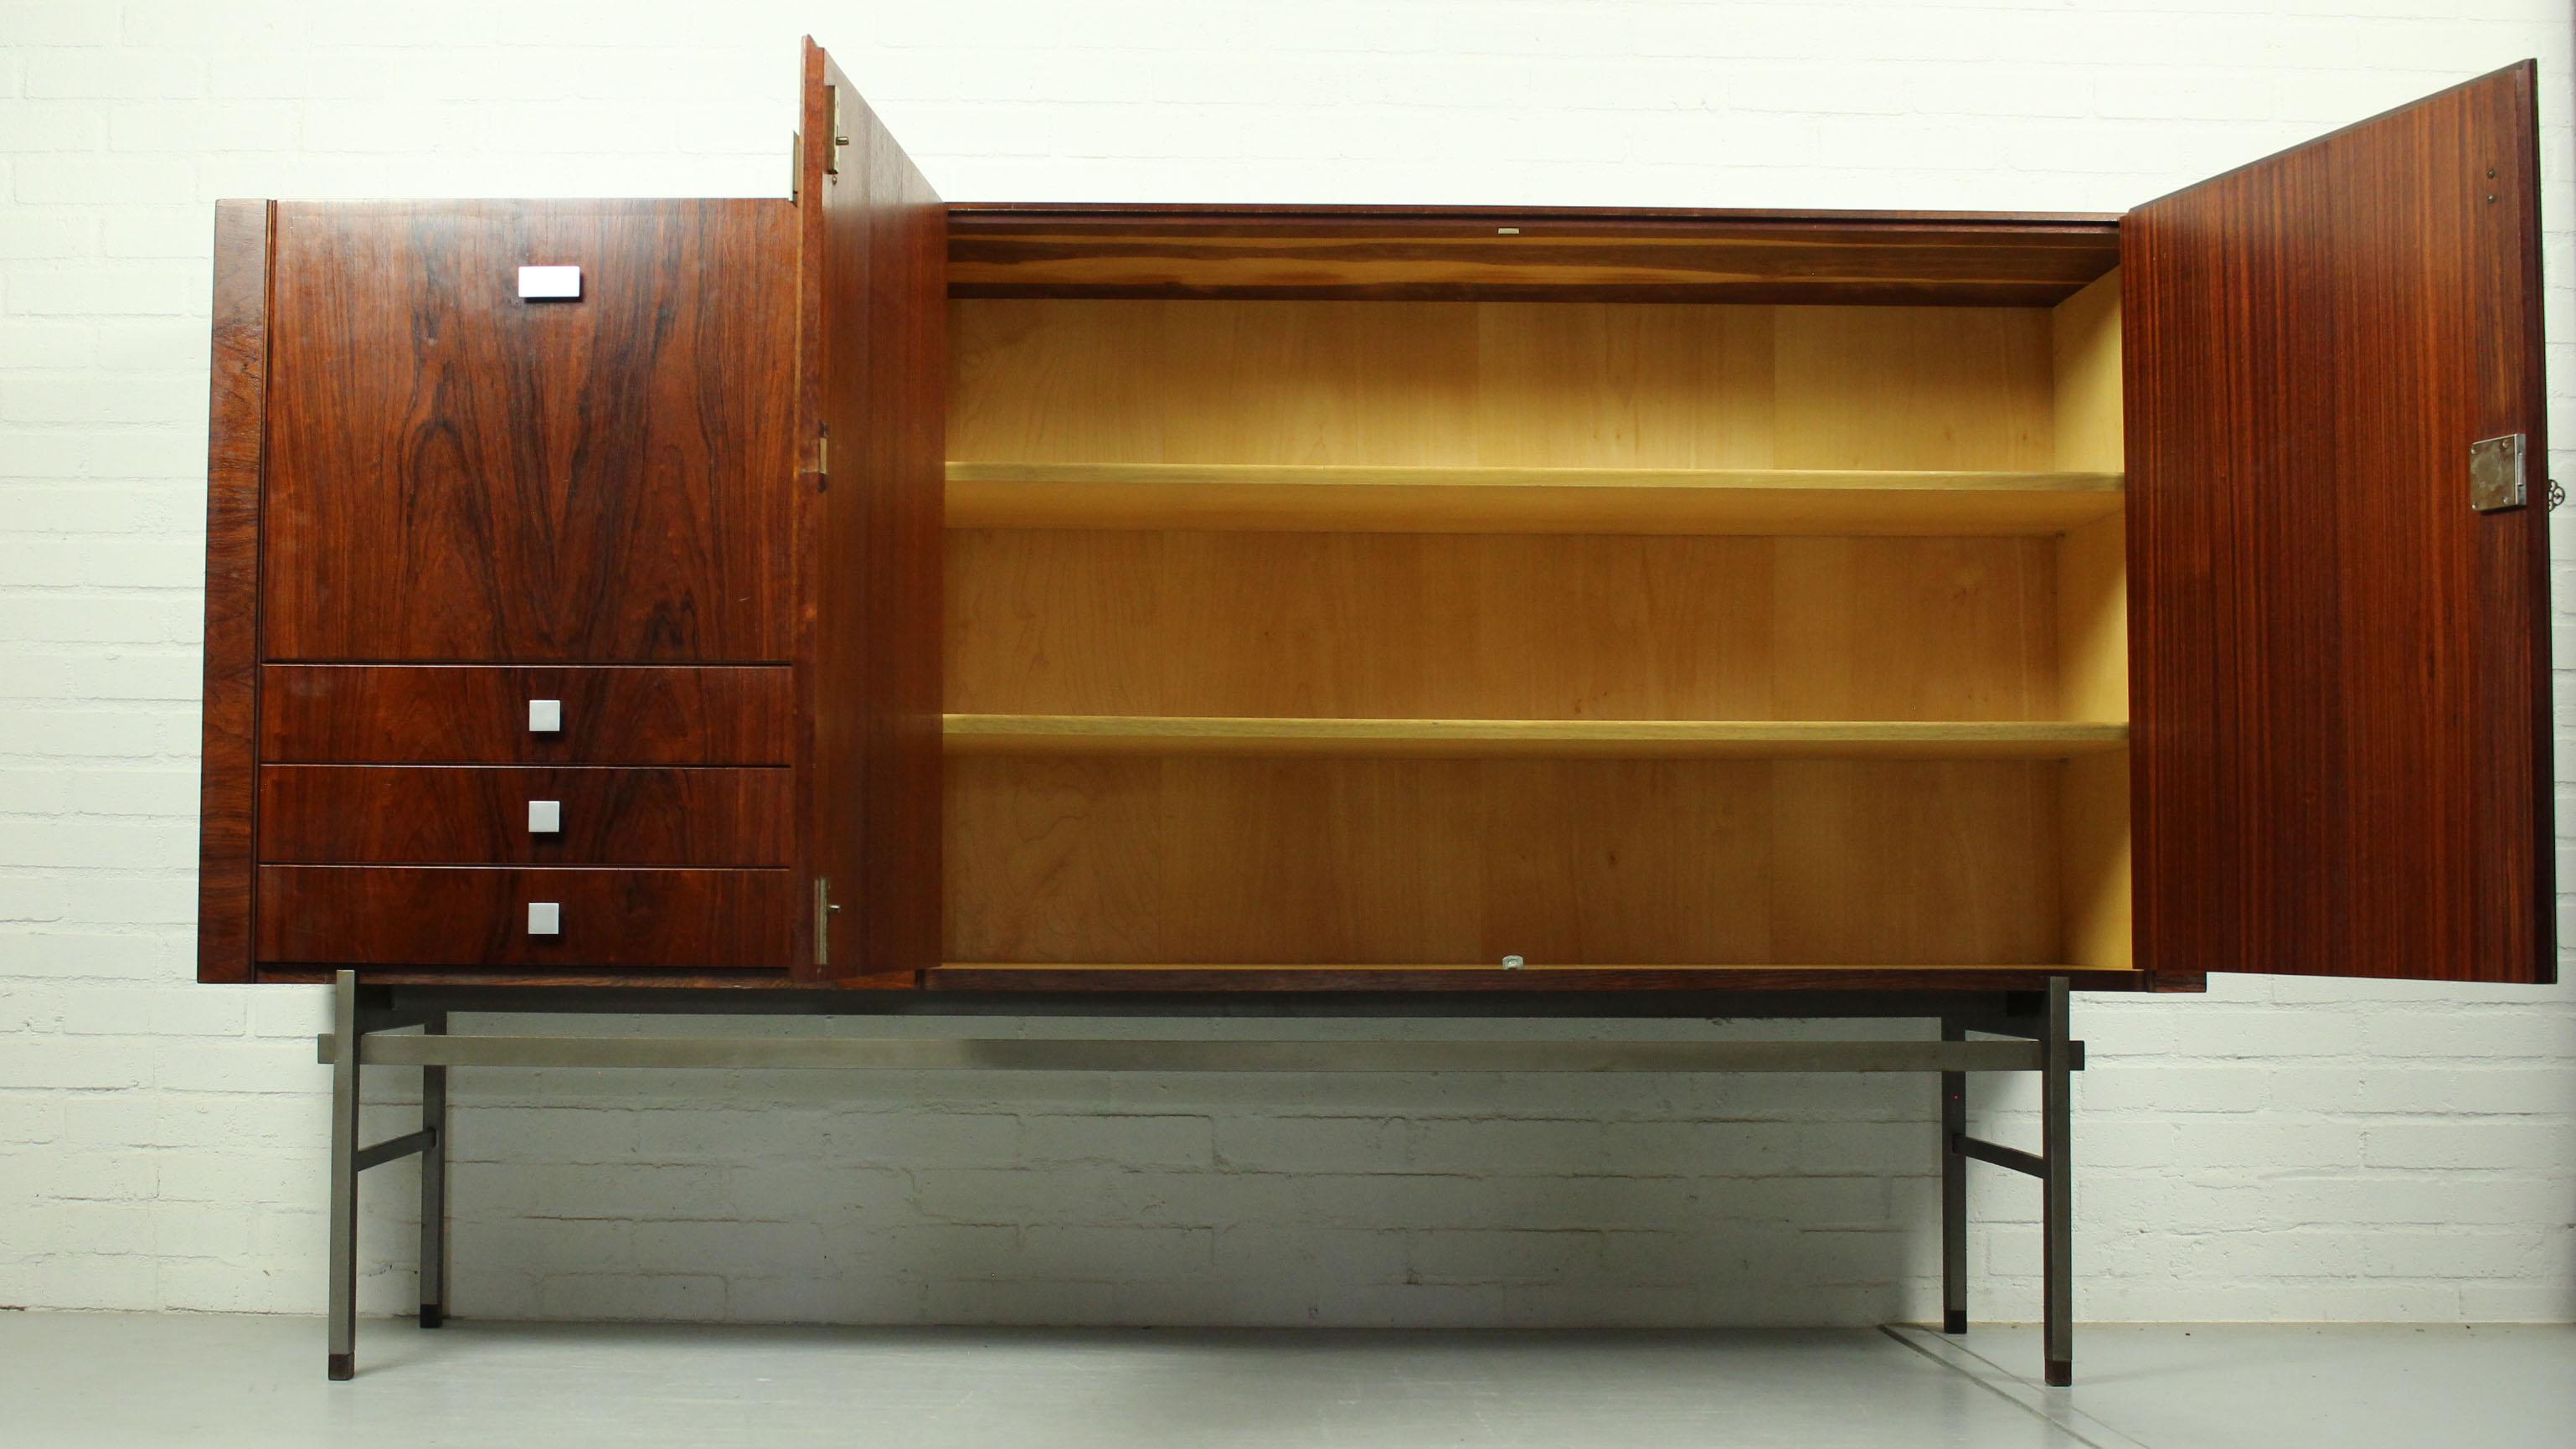 Beautiful credenza by famous designer Louis van Teeffelen for WéBé, 1960s. This Minimalist rosewood sideboard is often attributed to designer Alfred Hendrickx for Belform, but is actually model 317 by Louis van Teeffelen. The cabinet has three